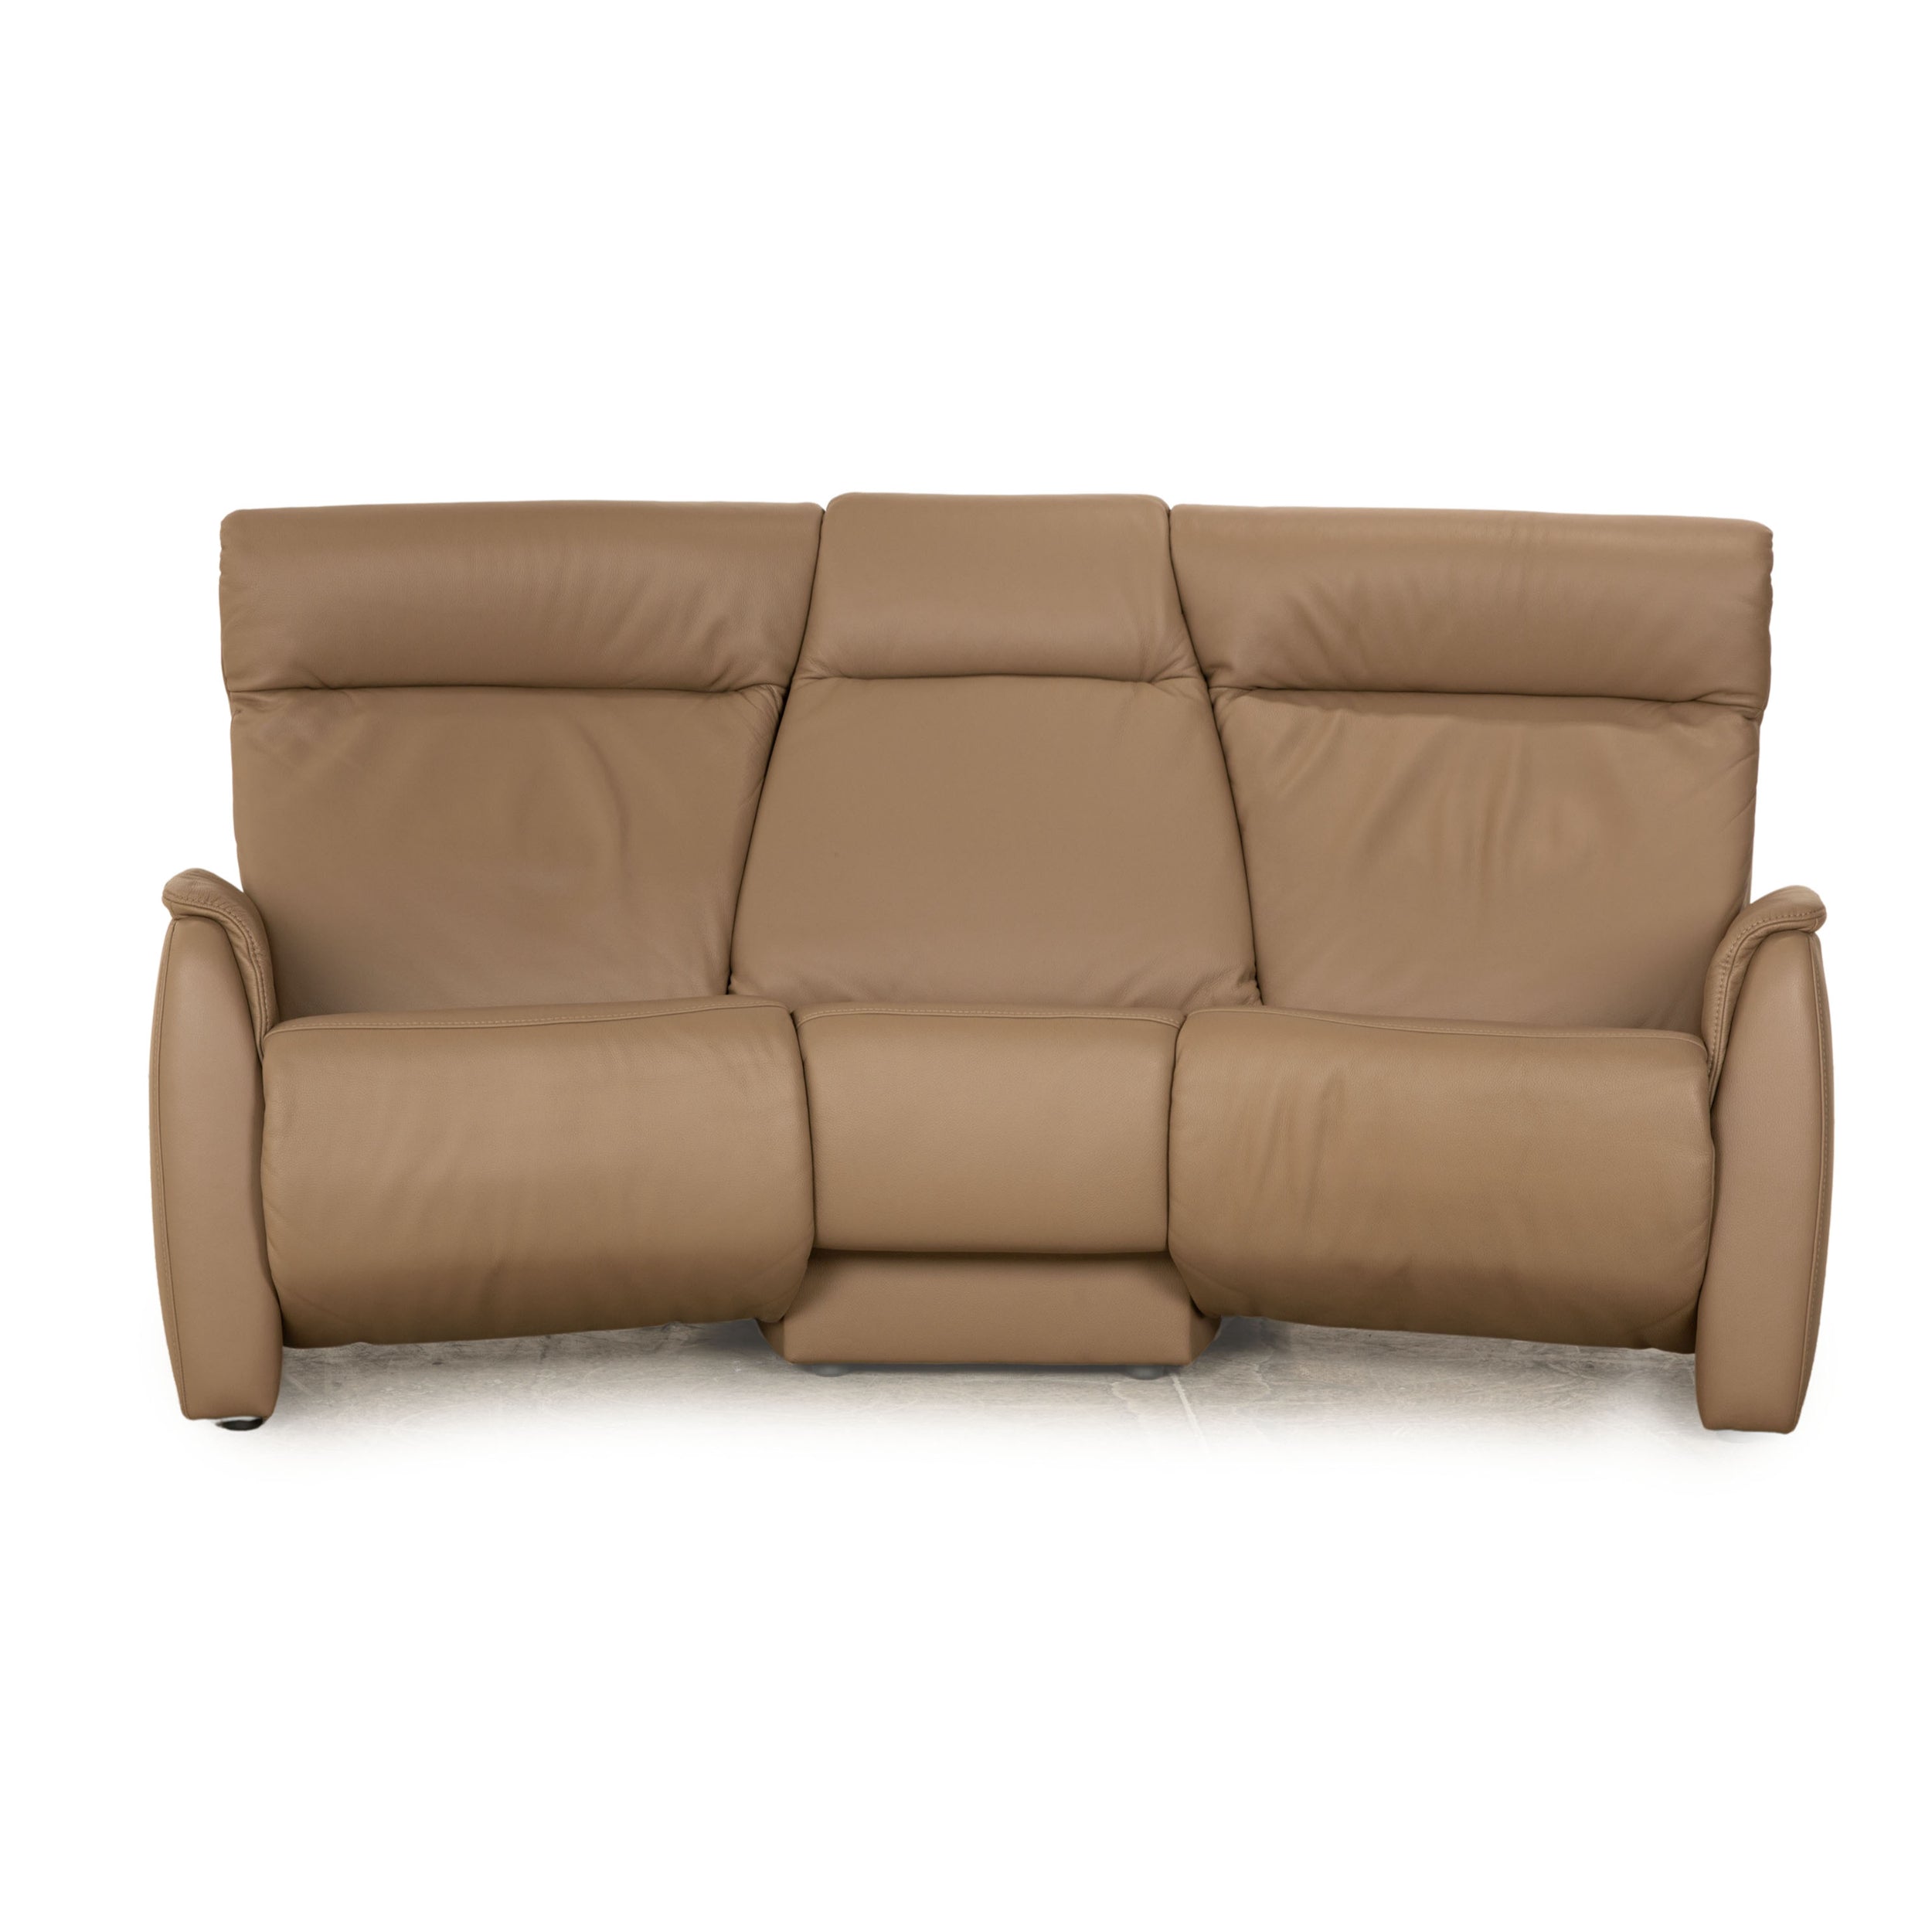 Himolla Trapeze Leather Three Seater Taupe Brown Manual Function Sofa Couch